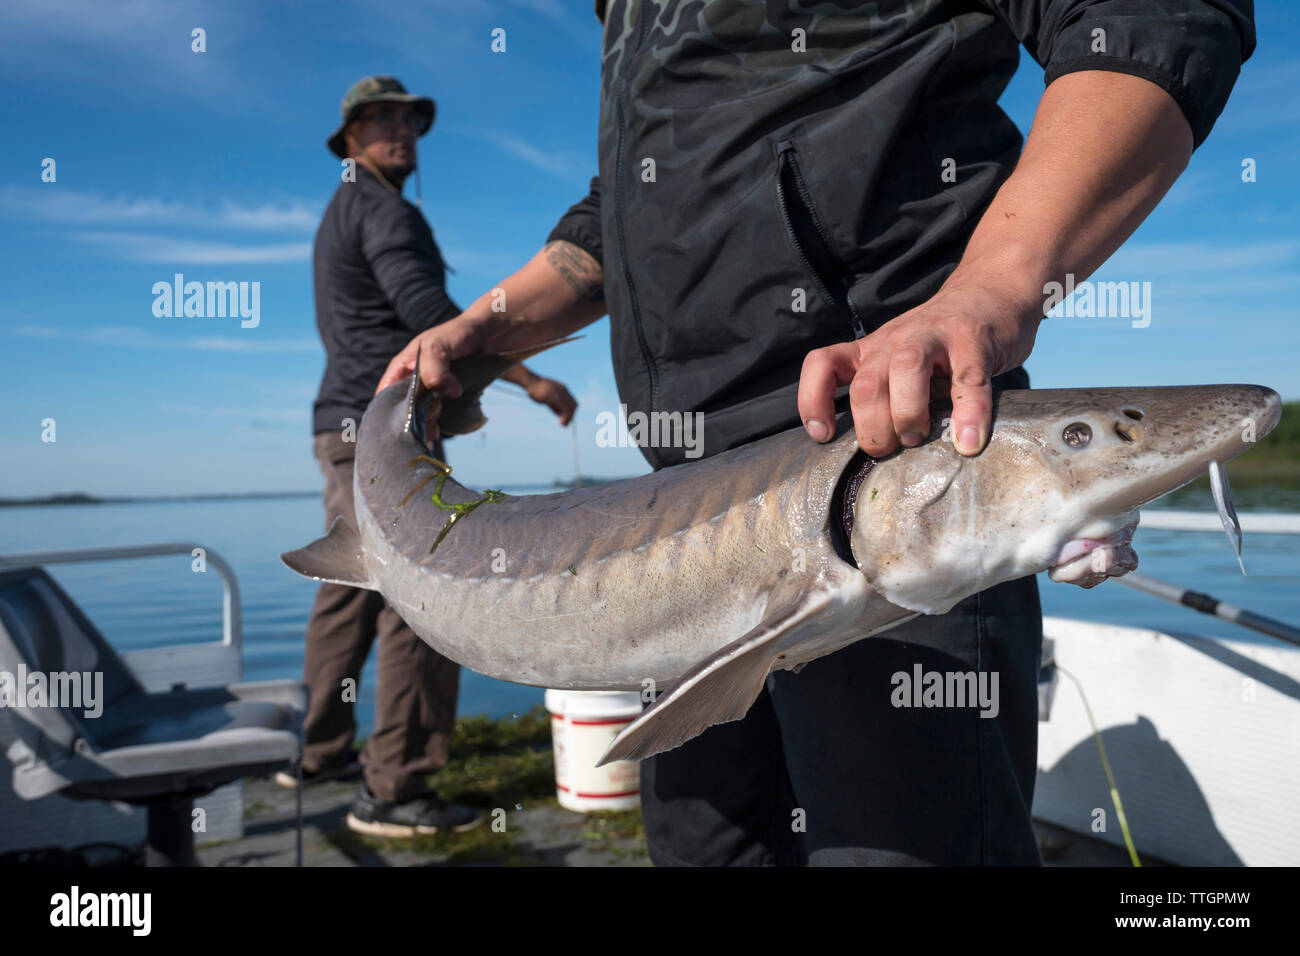 Mohawk men catch sturgeon in Akwesasne Waters with bait and line